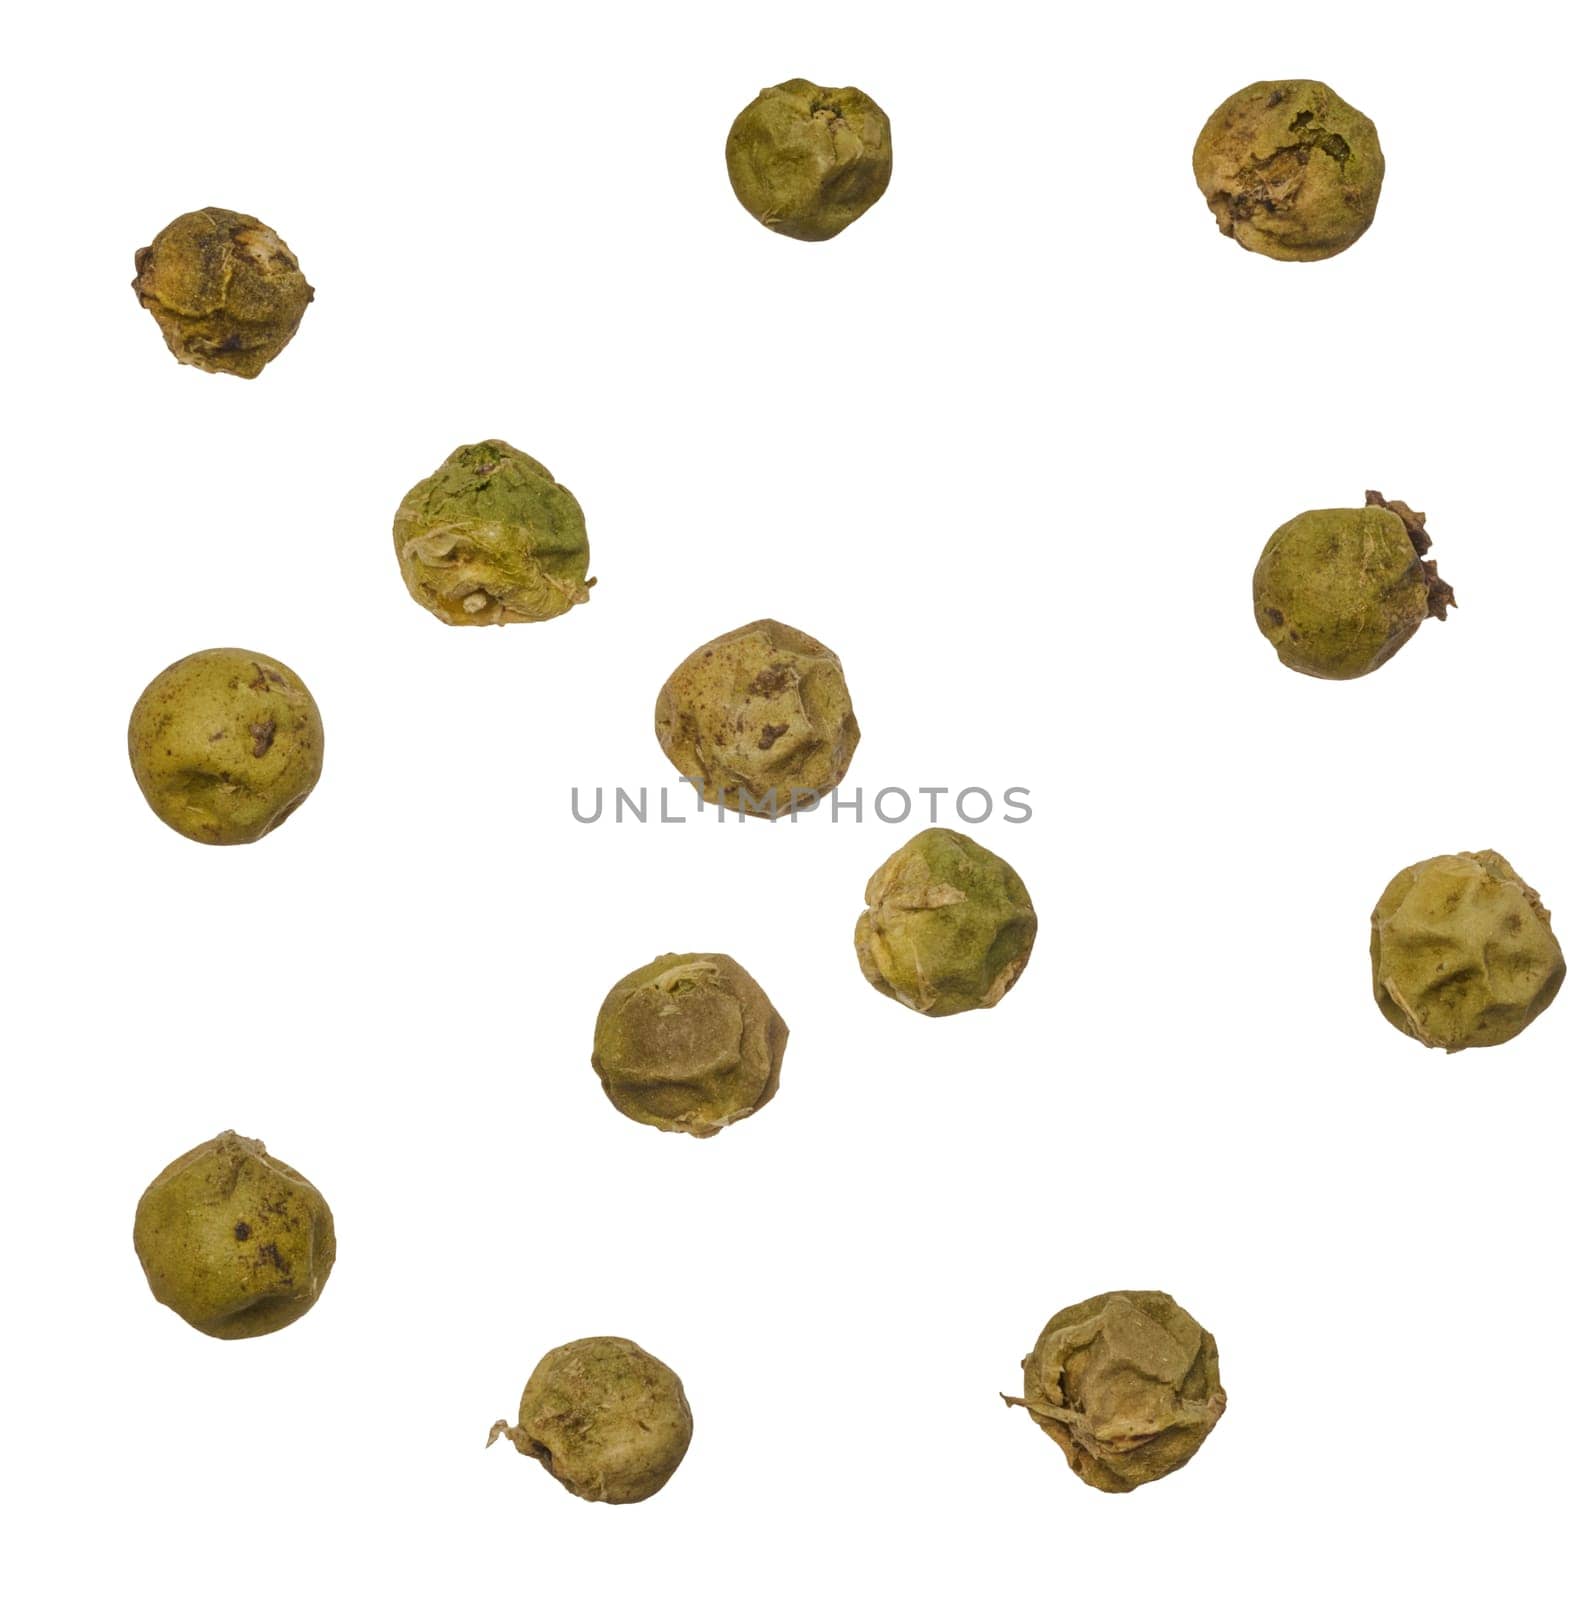 Dry round green peppercorns on isolated background by ndanko